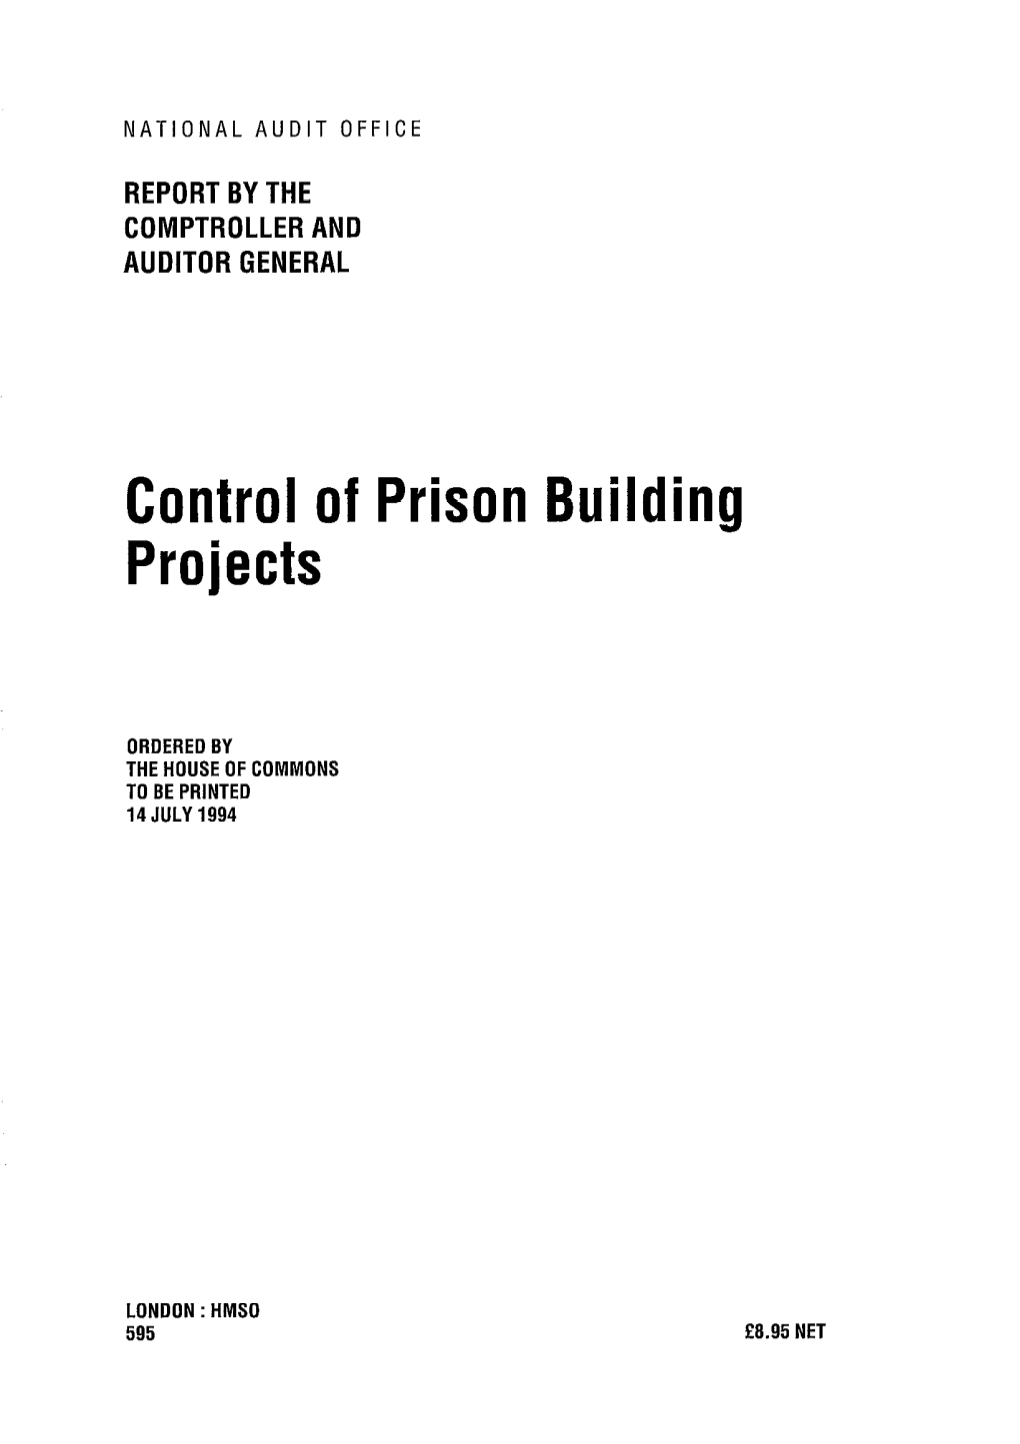 (HC 595 1993/94): Control of Prison Building Projects